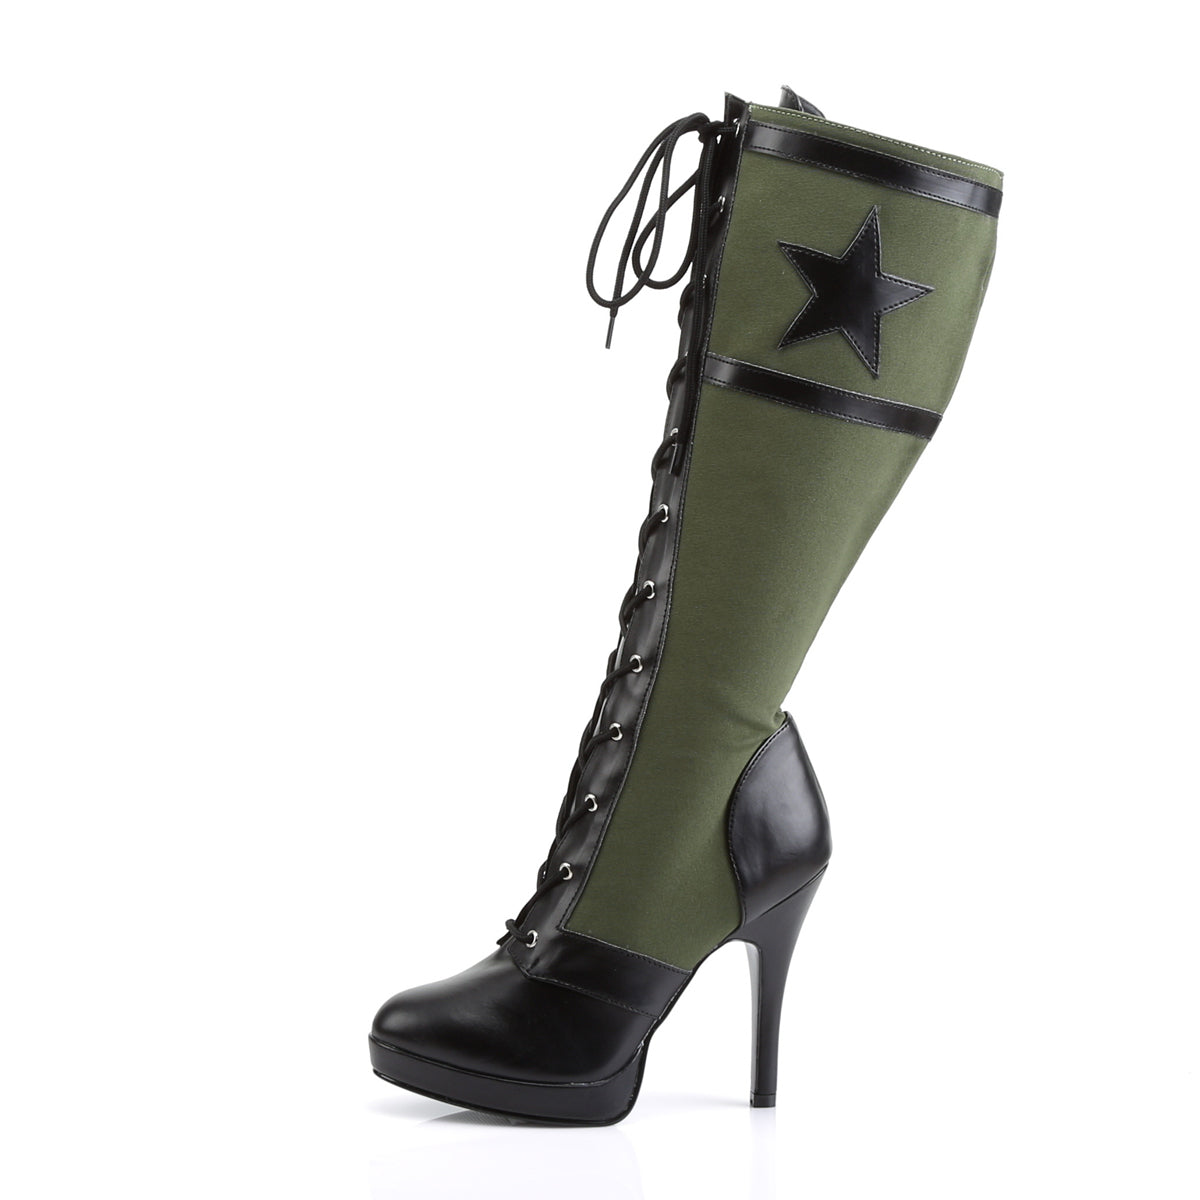 ARENA-2022 4.5" Heel Black Army Green Canvas Women's Boots Funtasma Costume Shoes 